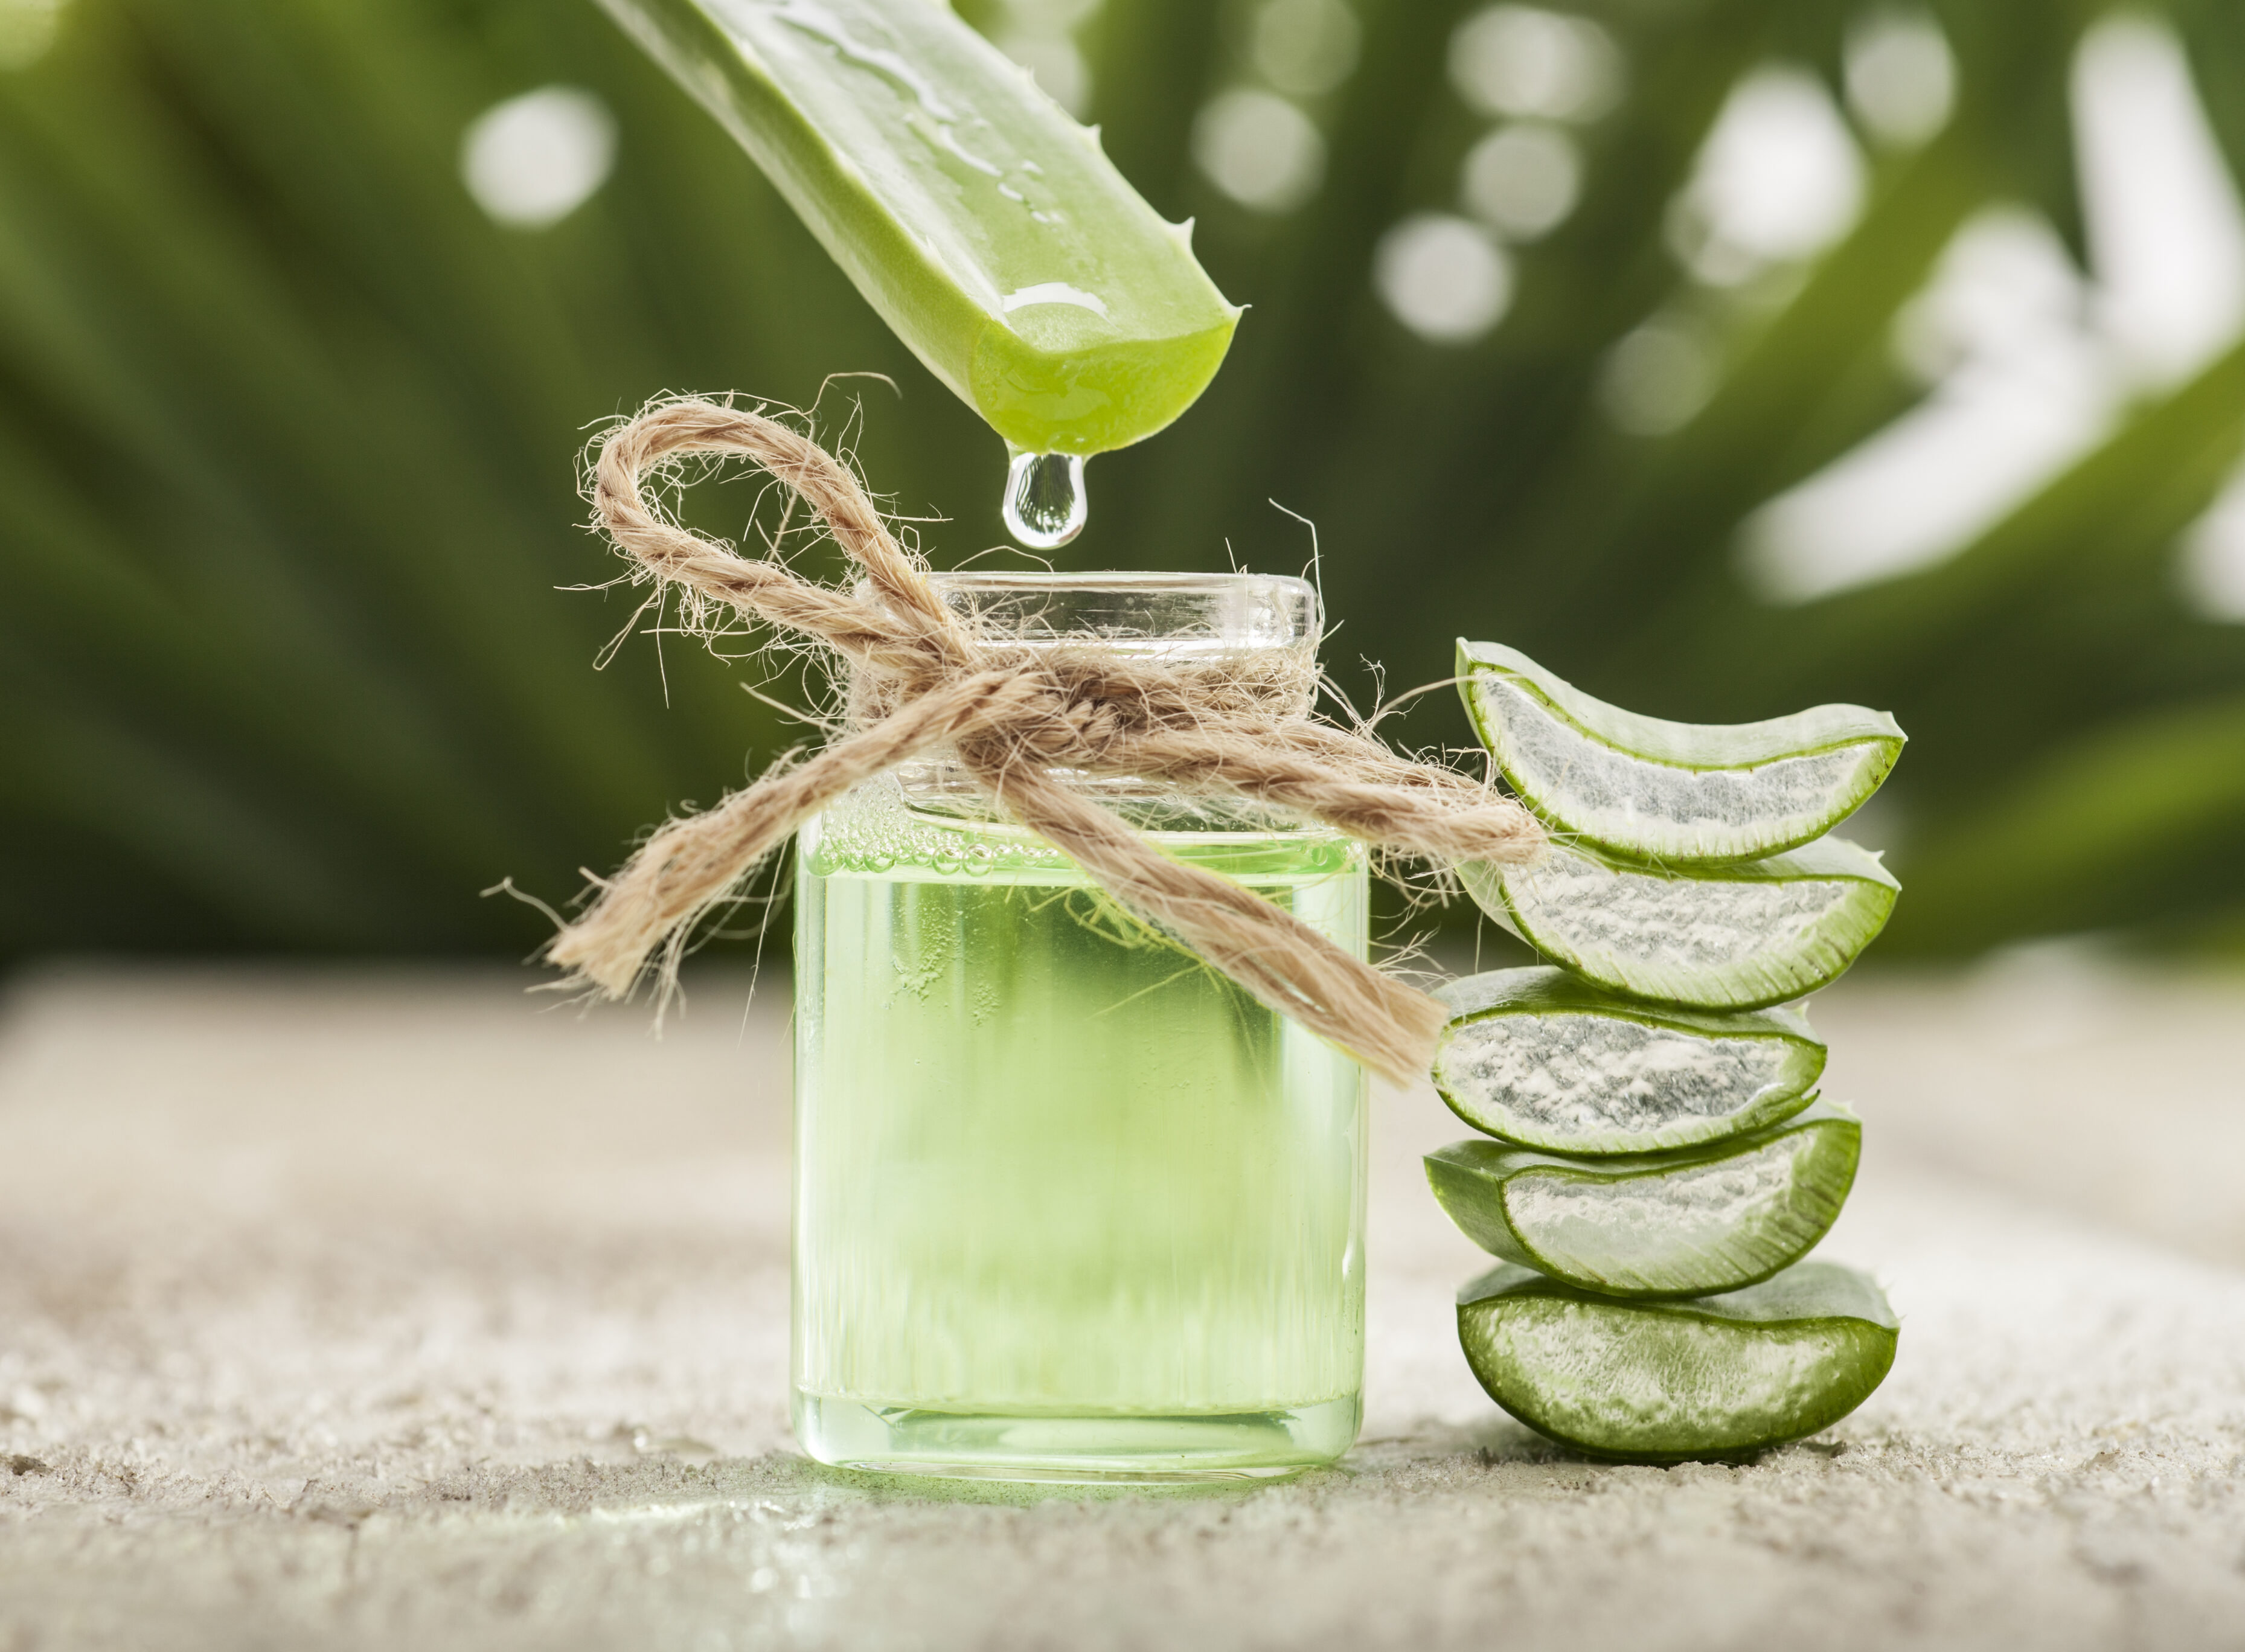 Aloe vera gel can be beneficial - Soothe and hydrate